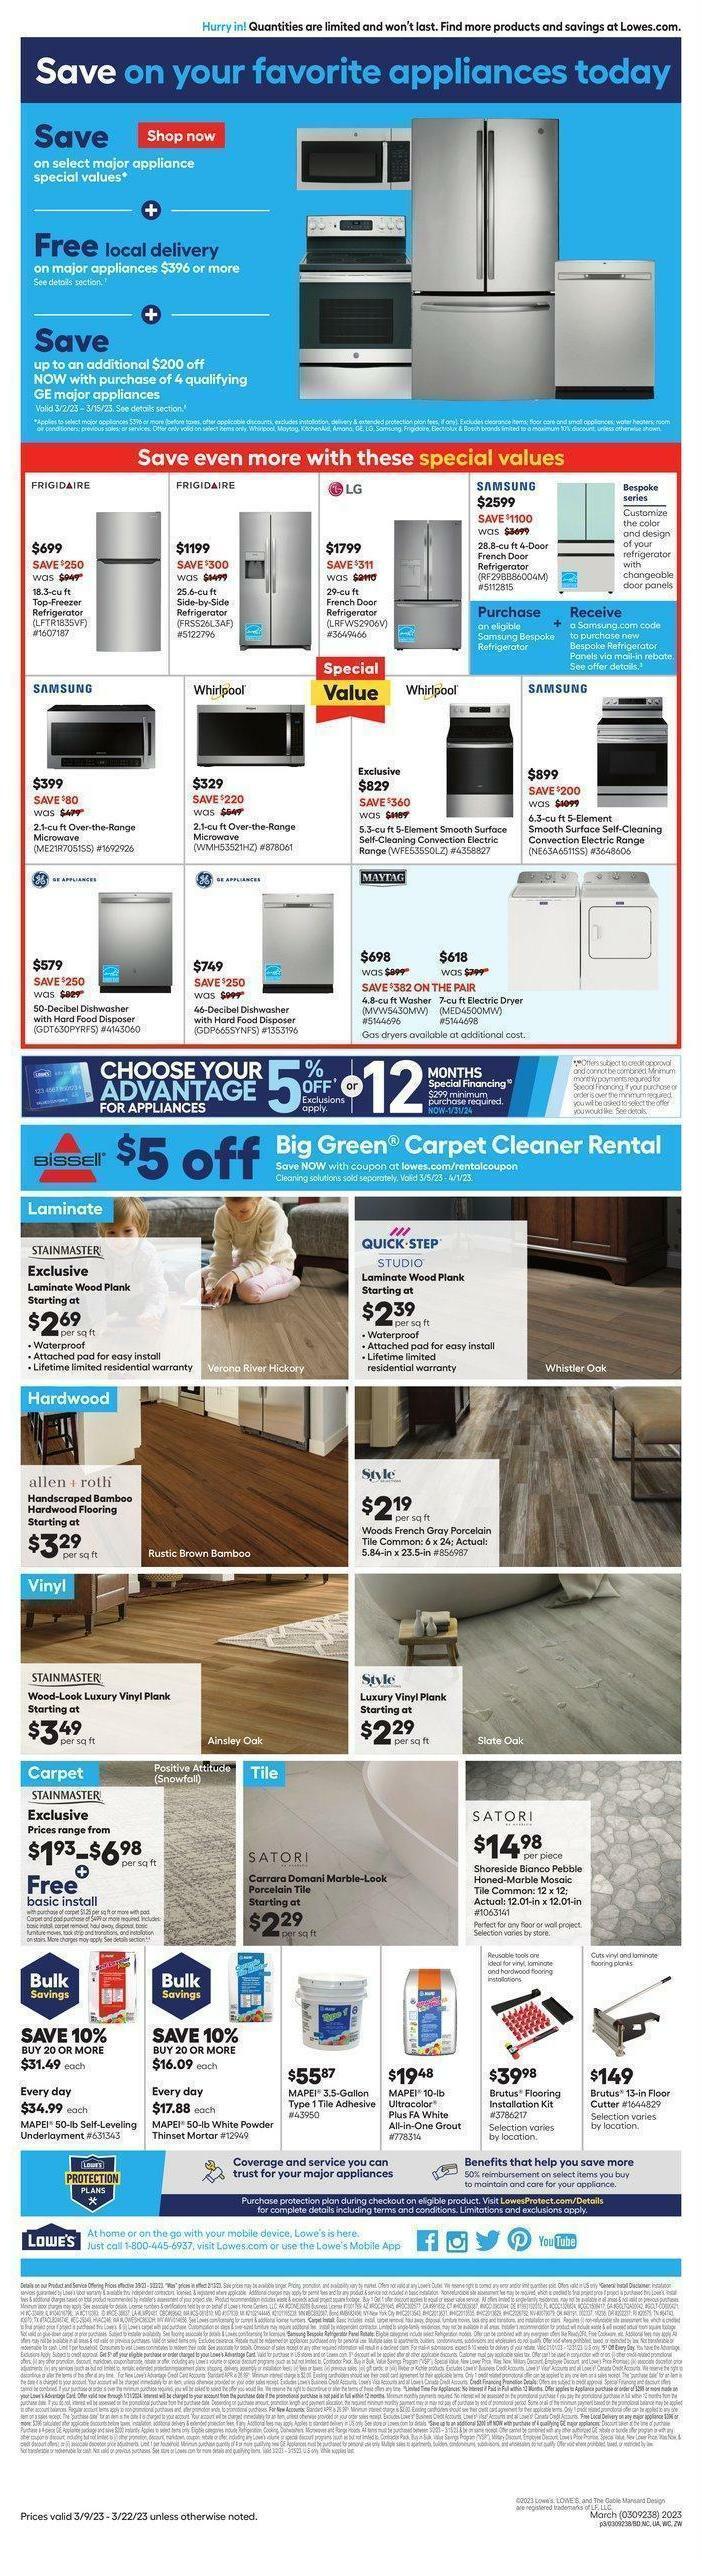 Lowe's Weekly Ad from March 9